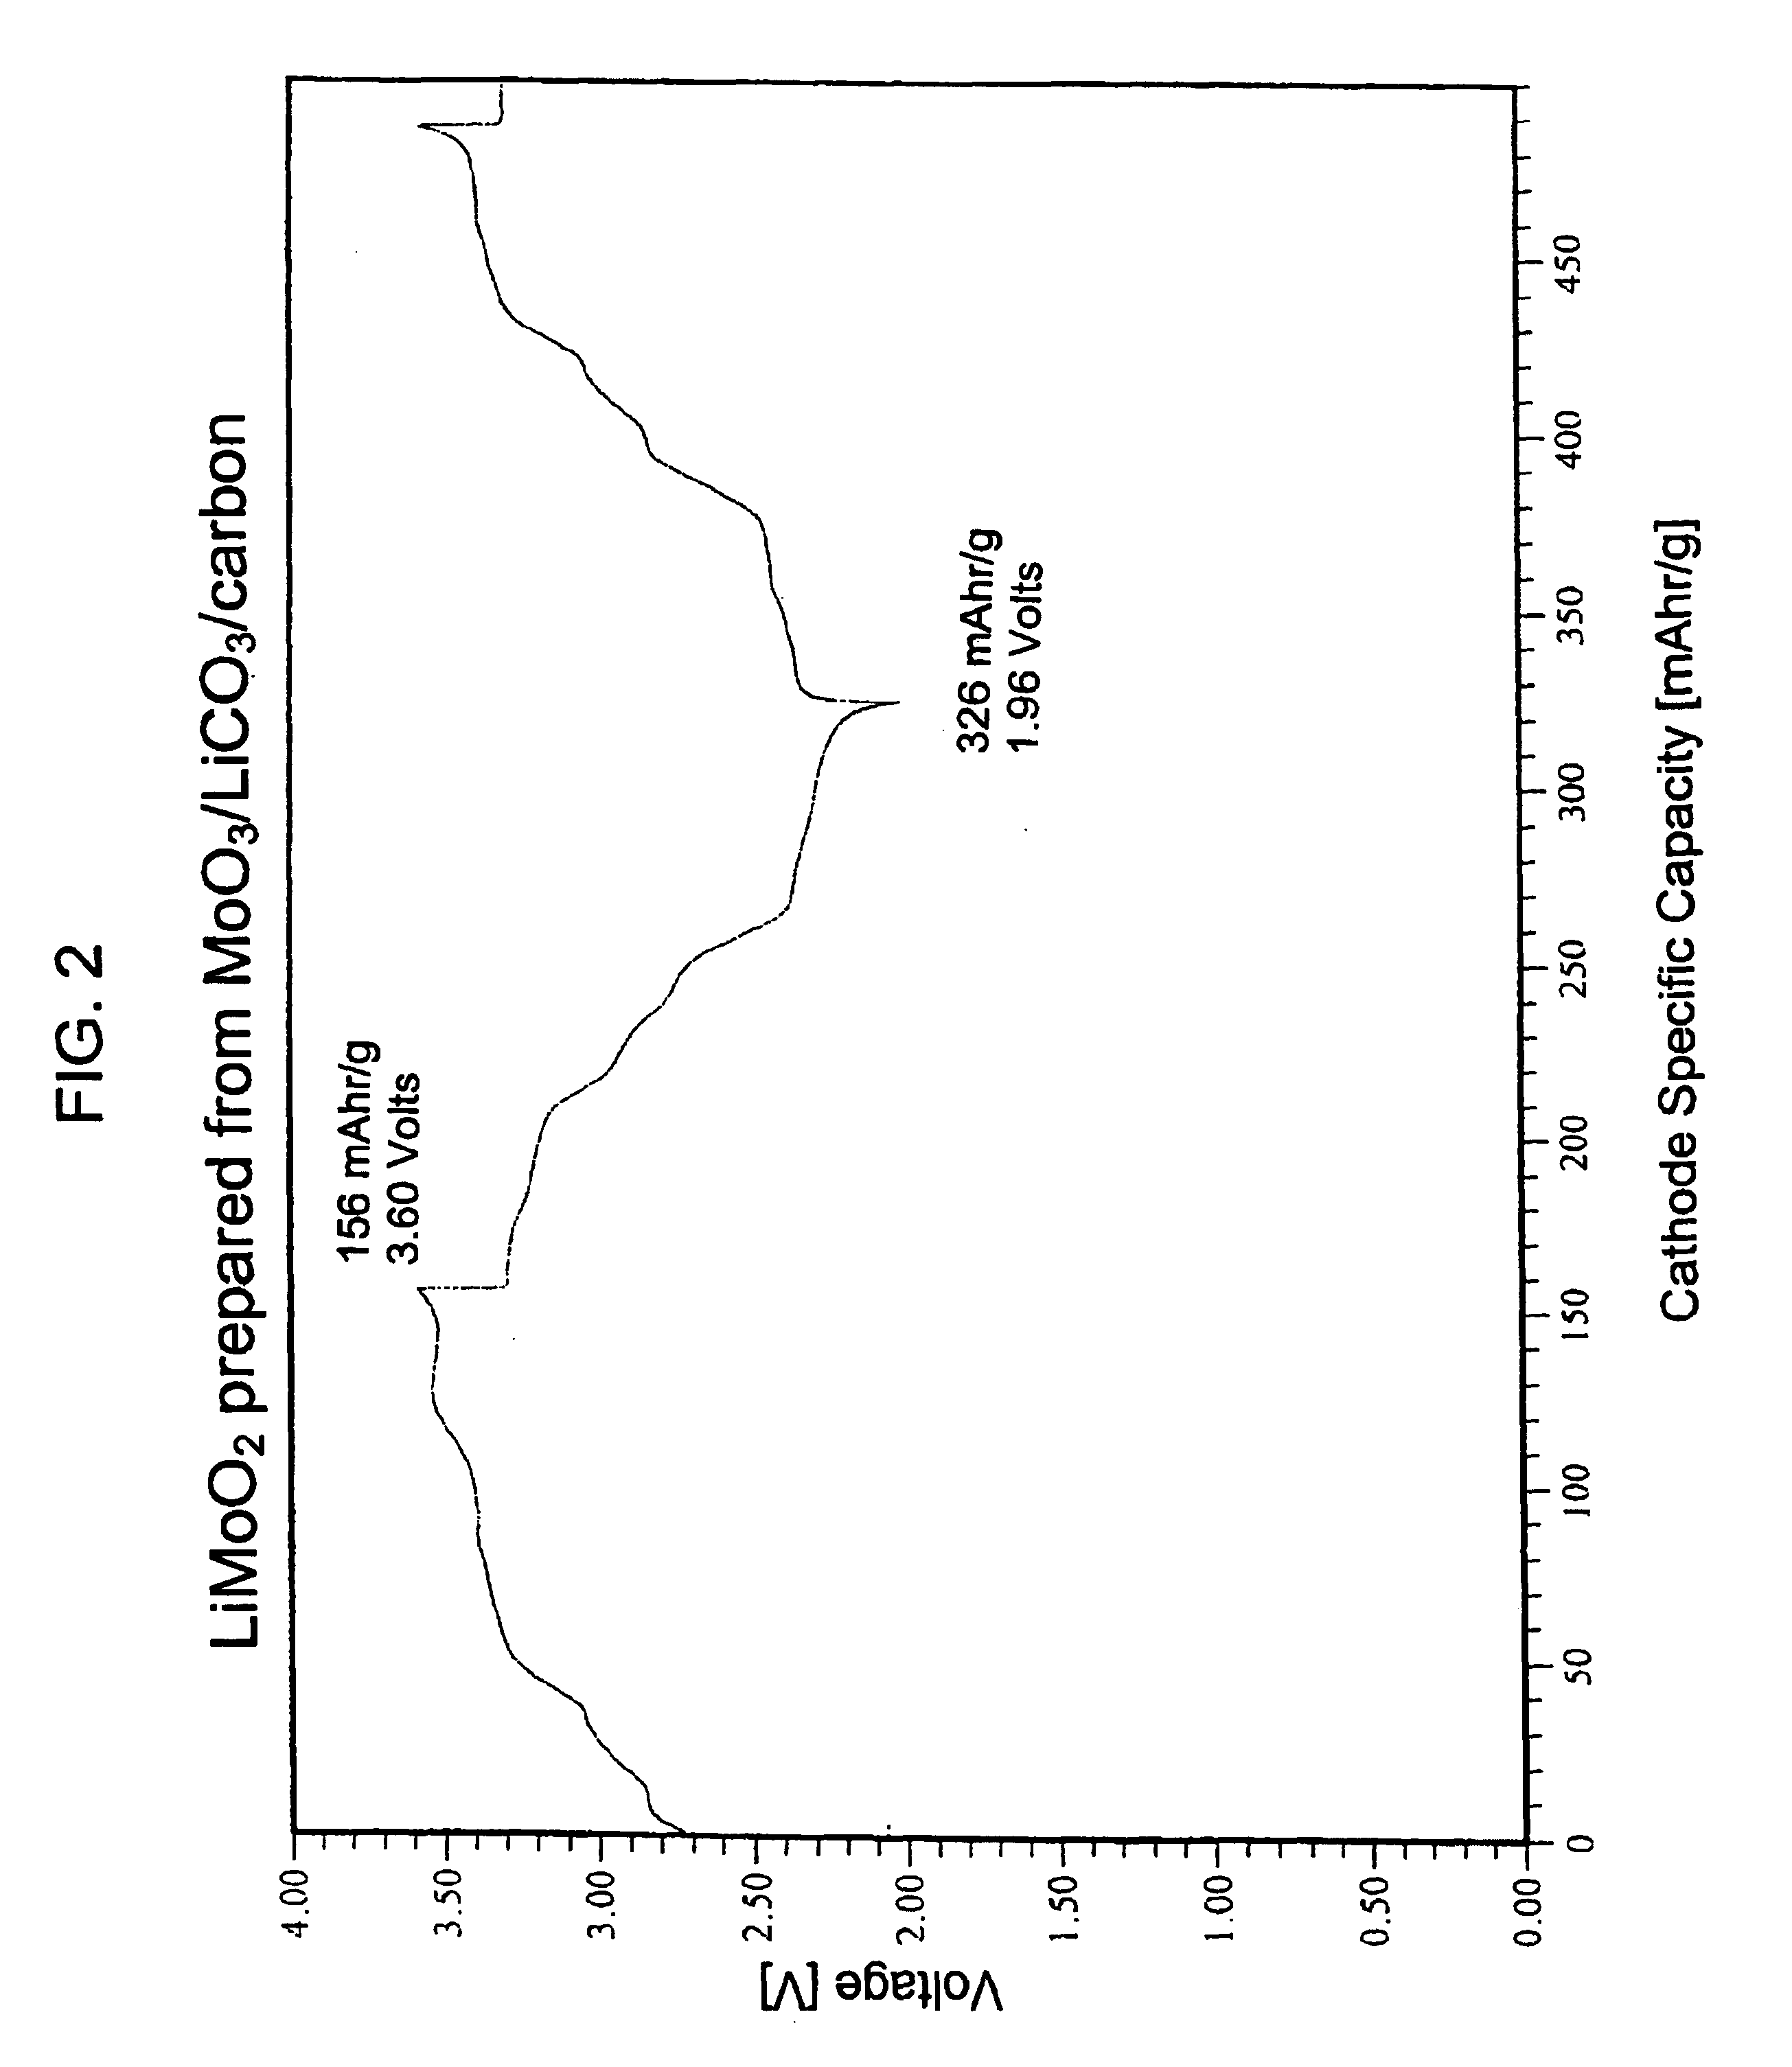 Lithiated molybdenum oxide active materials